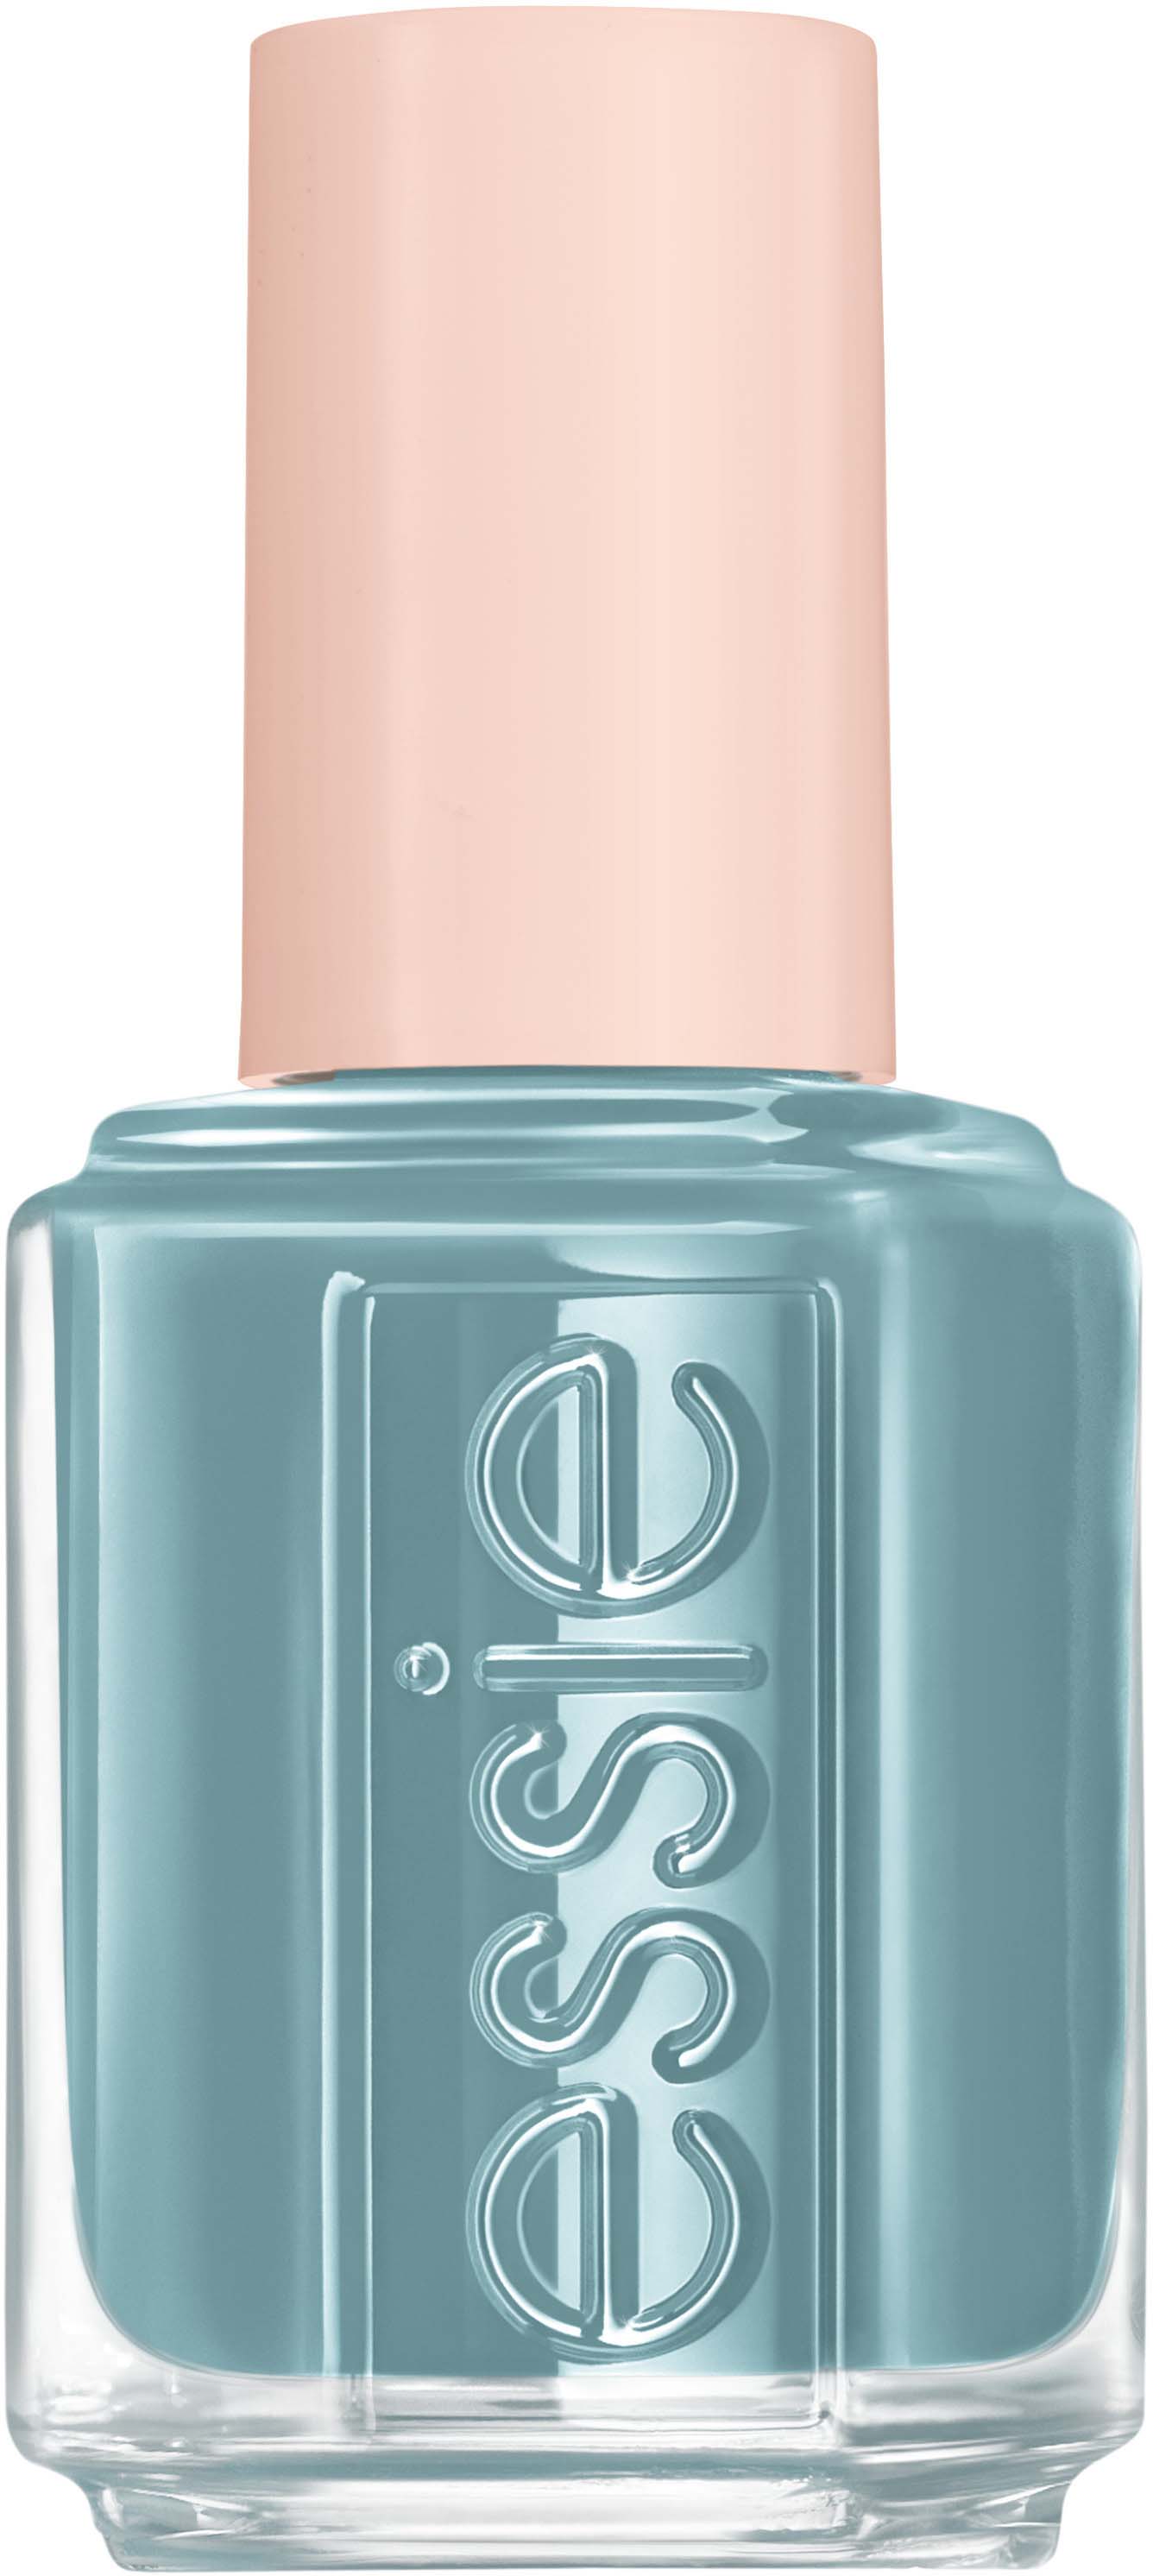 Essie LOVE by Essie 80% Plant-based Nail Color 210 Good Impressions